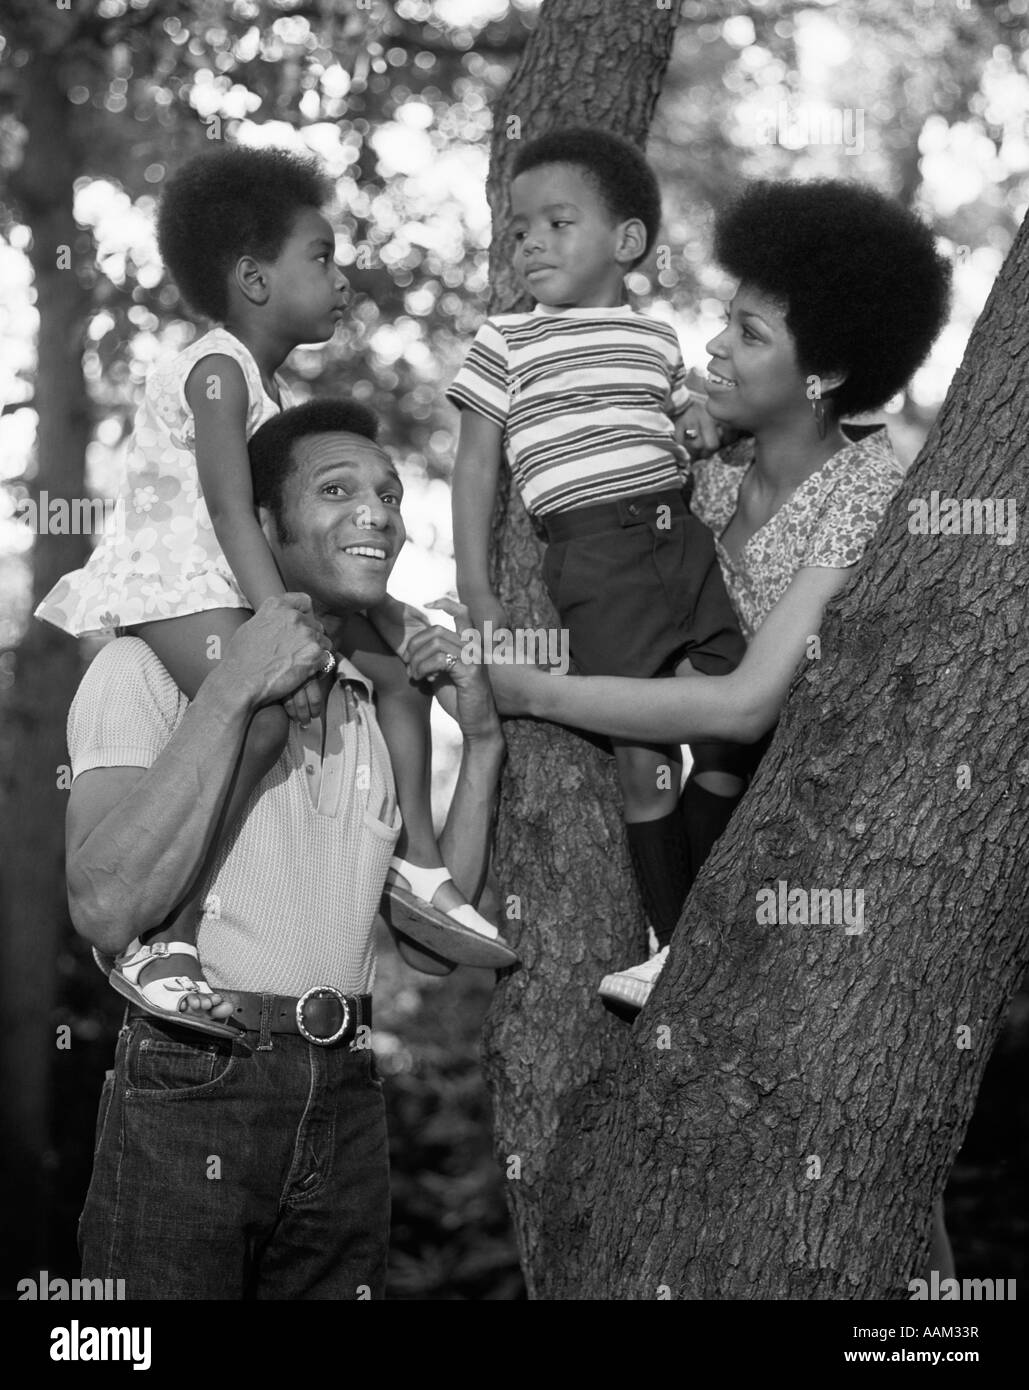 1970s AFRICAN AMERICAN FAMILY OUTDOORS BY TRUNK OF TREE MOTHER FATHER BOY GIRL Stock Photo